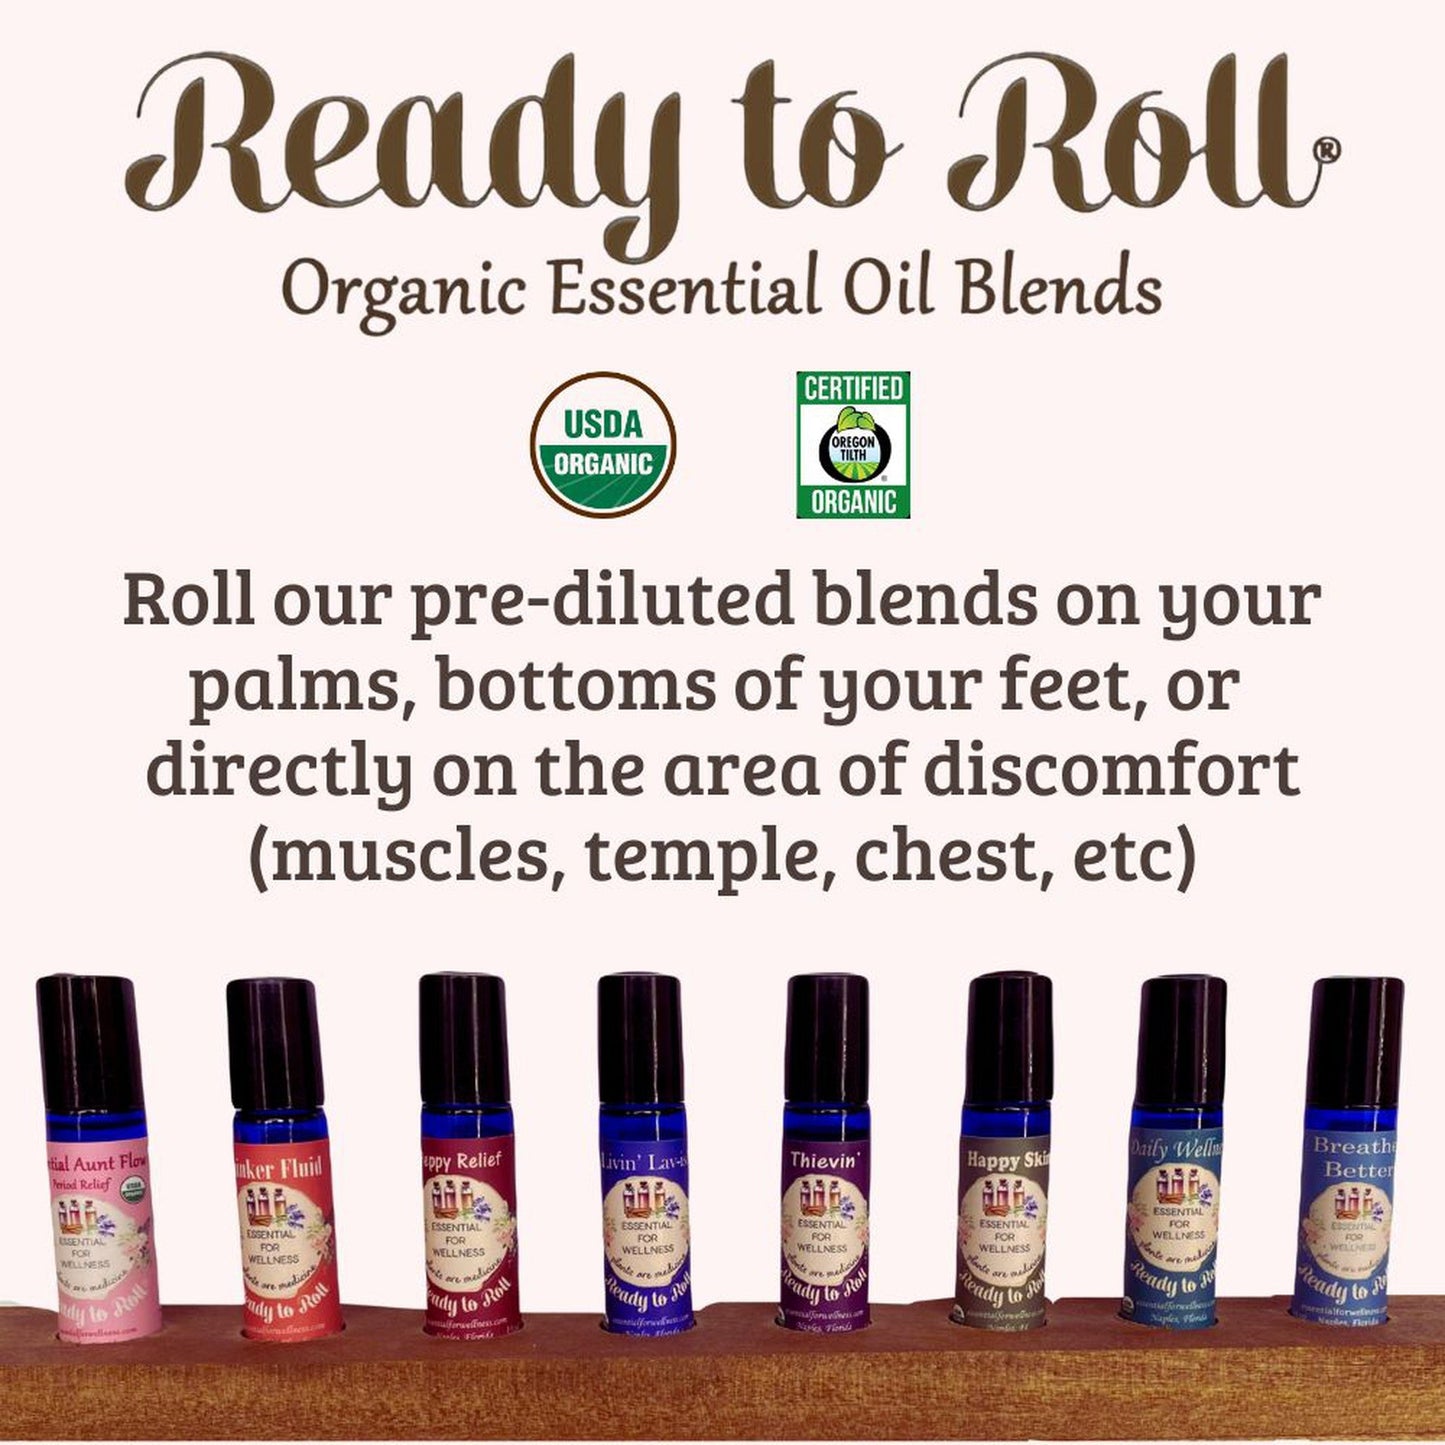 Ready to Roll® Daily Wellness Organic Essential Oil Blends